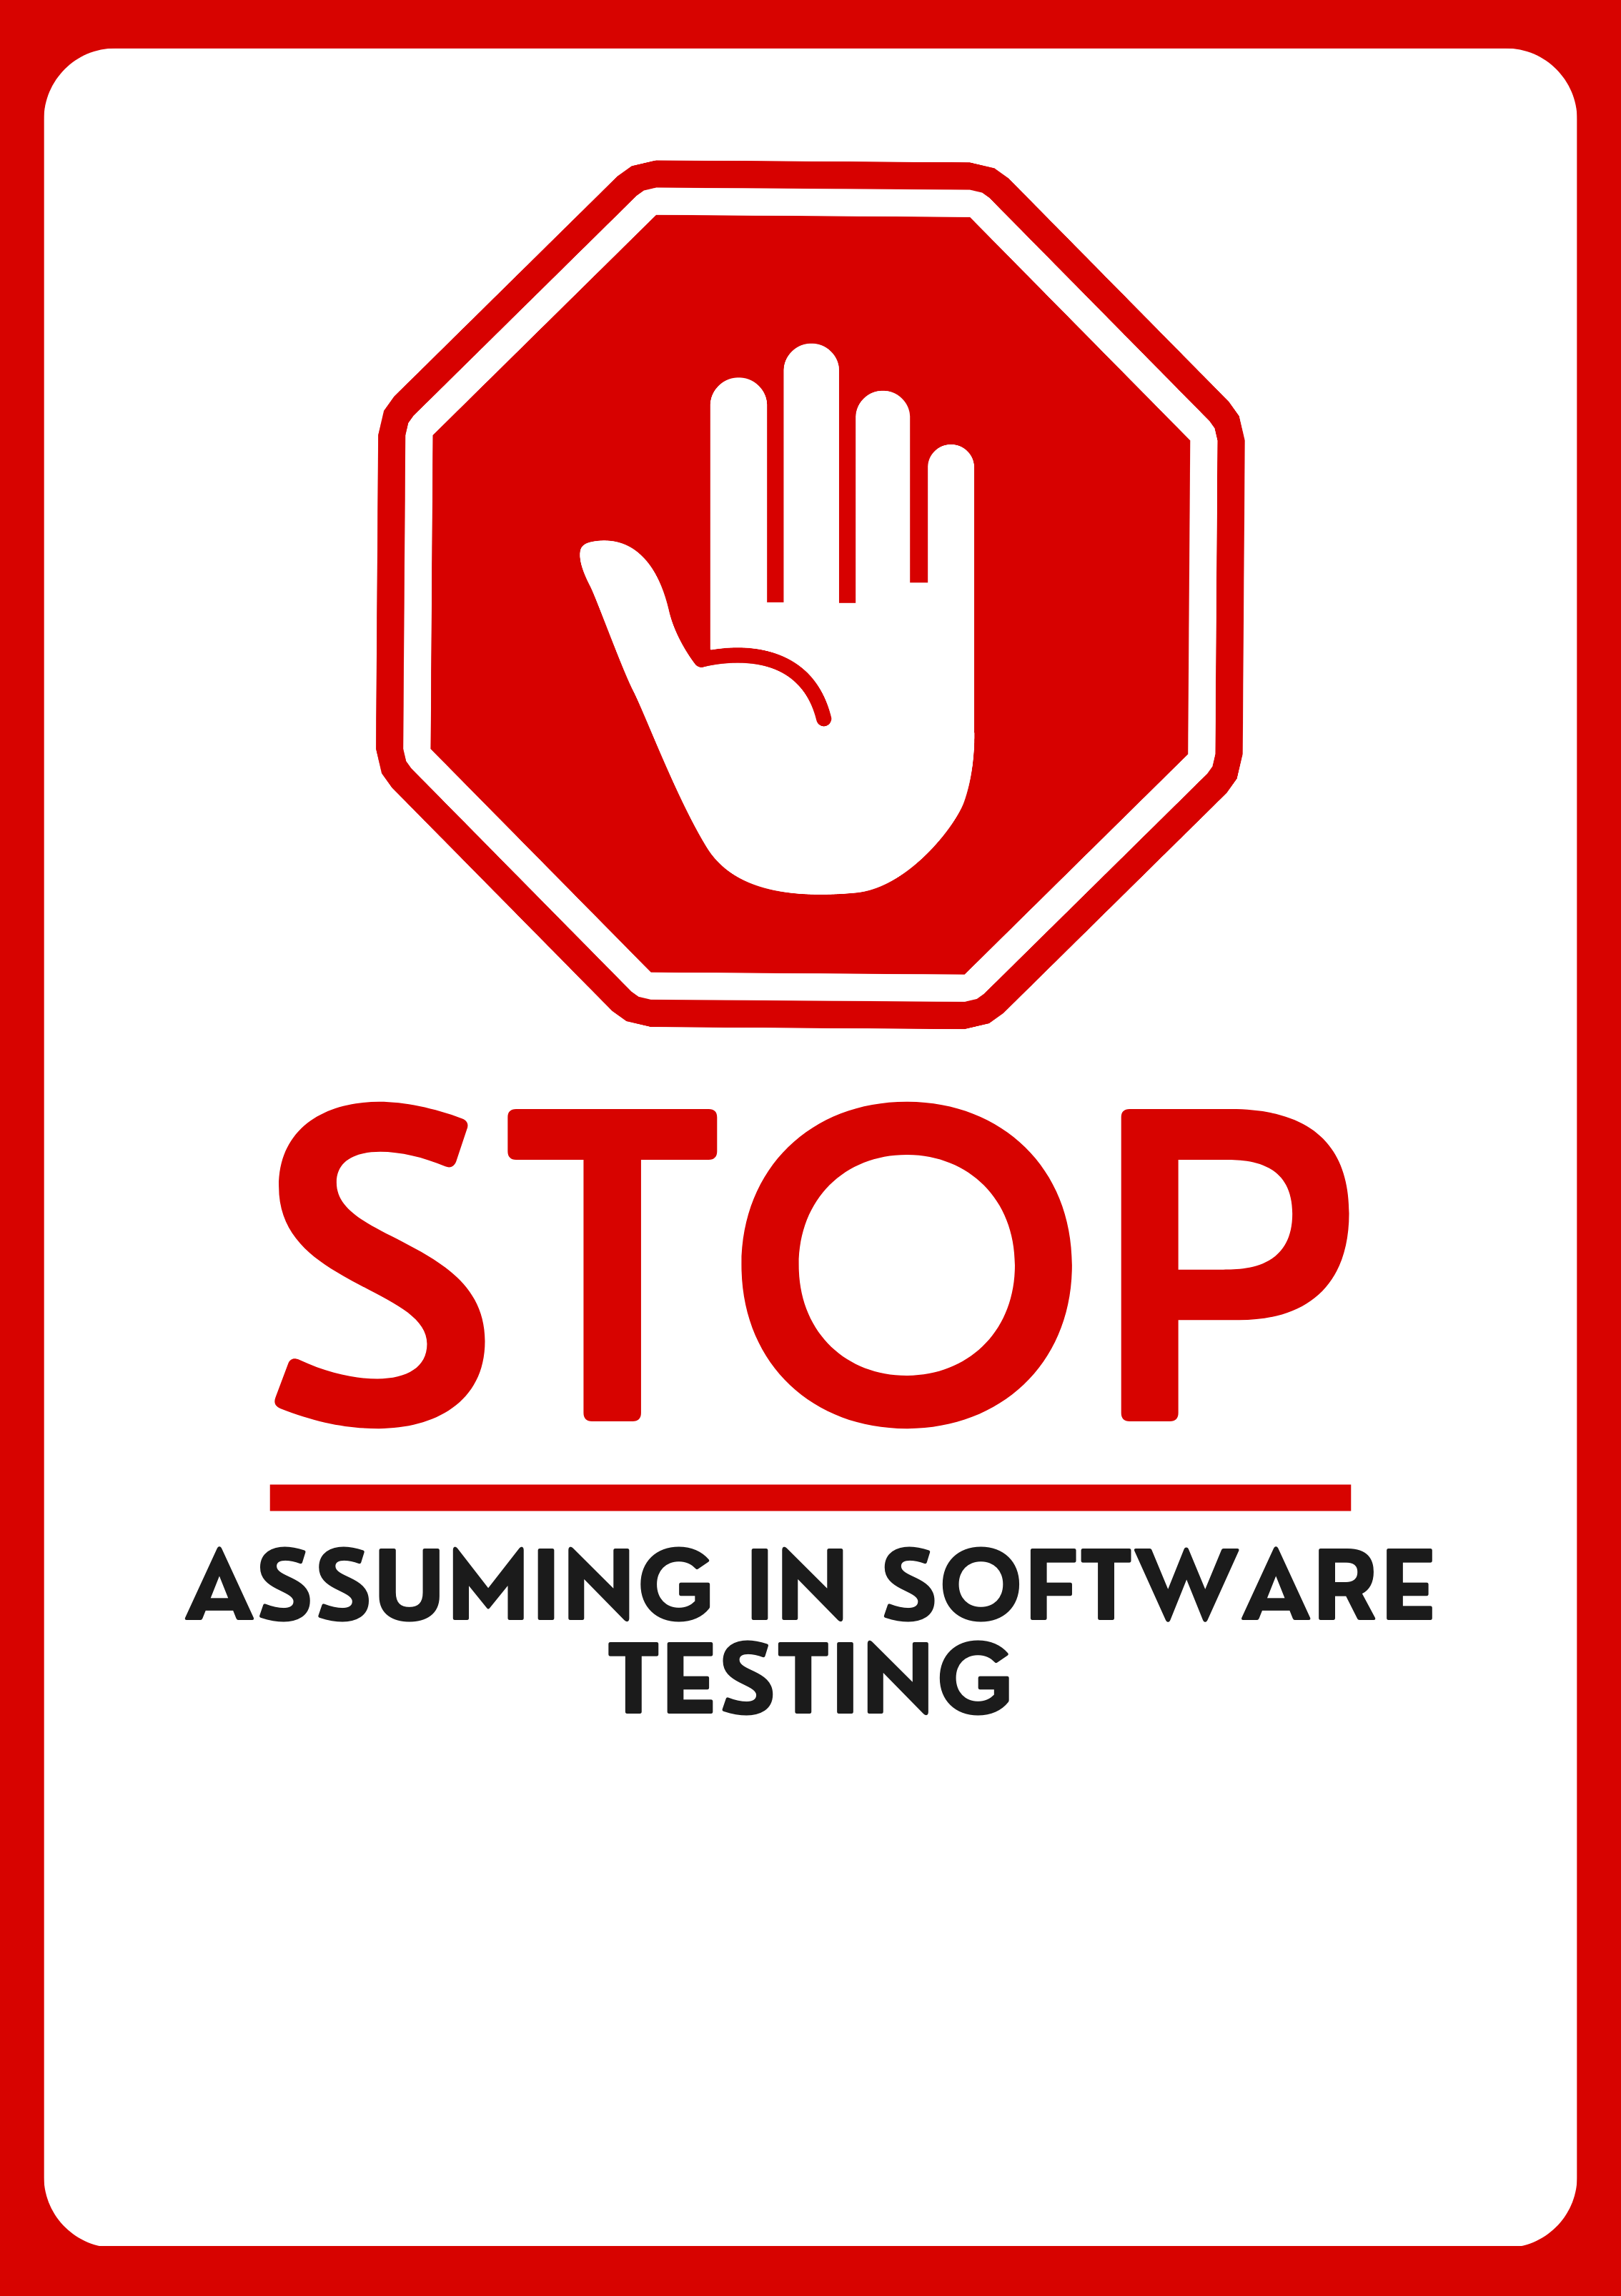 How Assumptions in Software Testing can be Evil